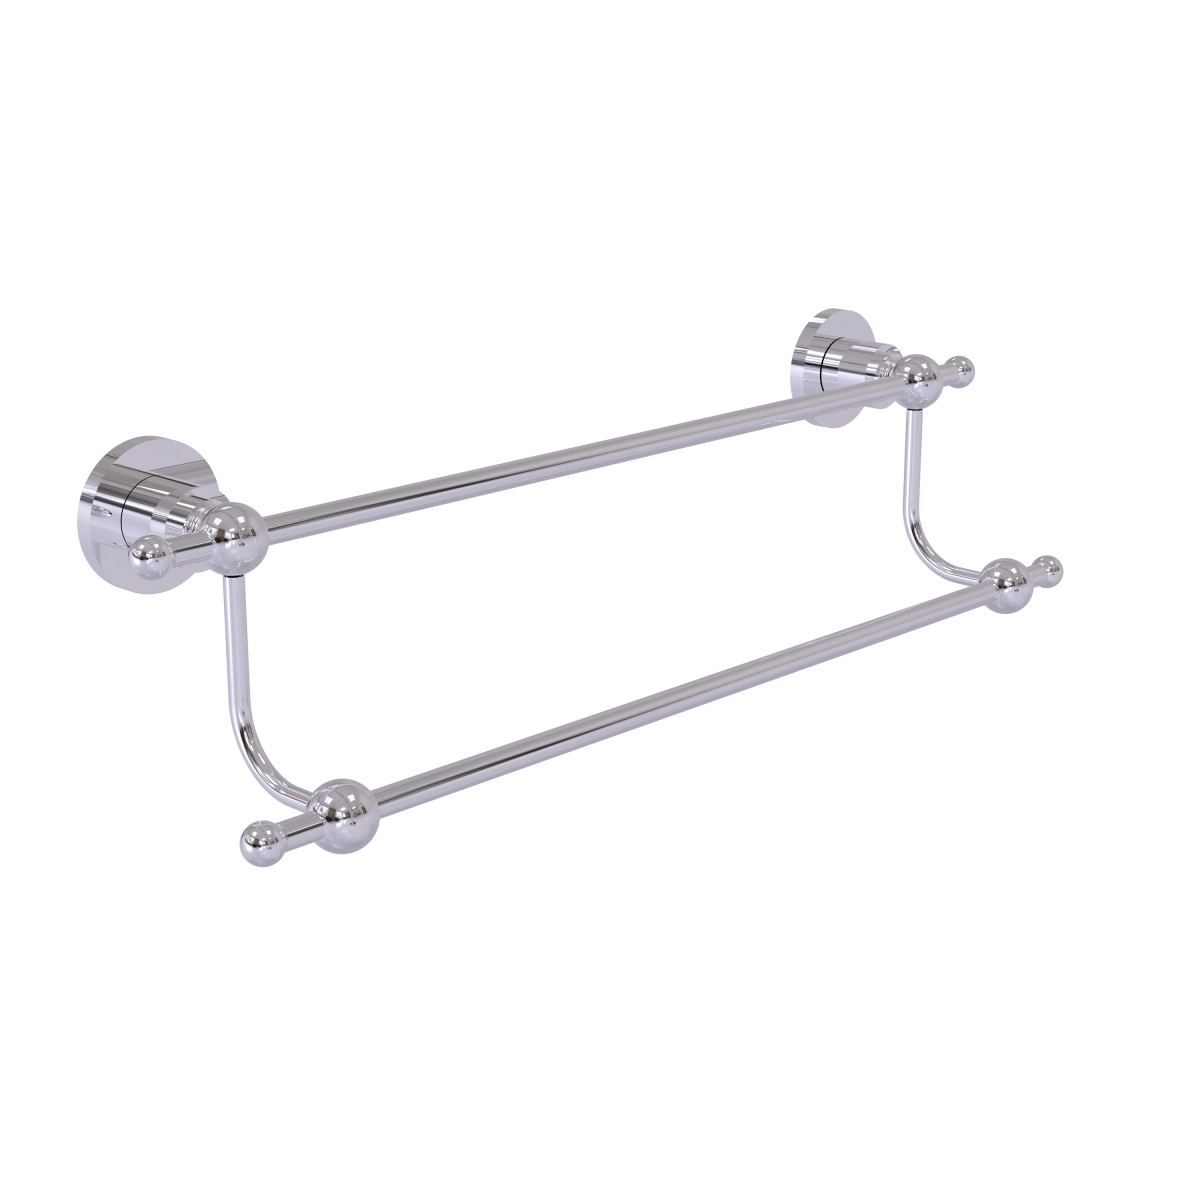 Allied Brass AP-72-24-PC 24 in. Astor Place Collection Double Towel Bar, Polished Chrome